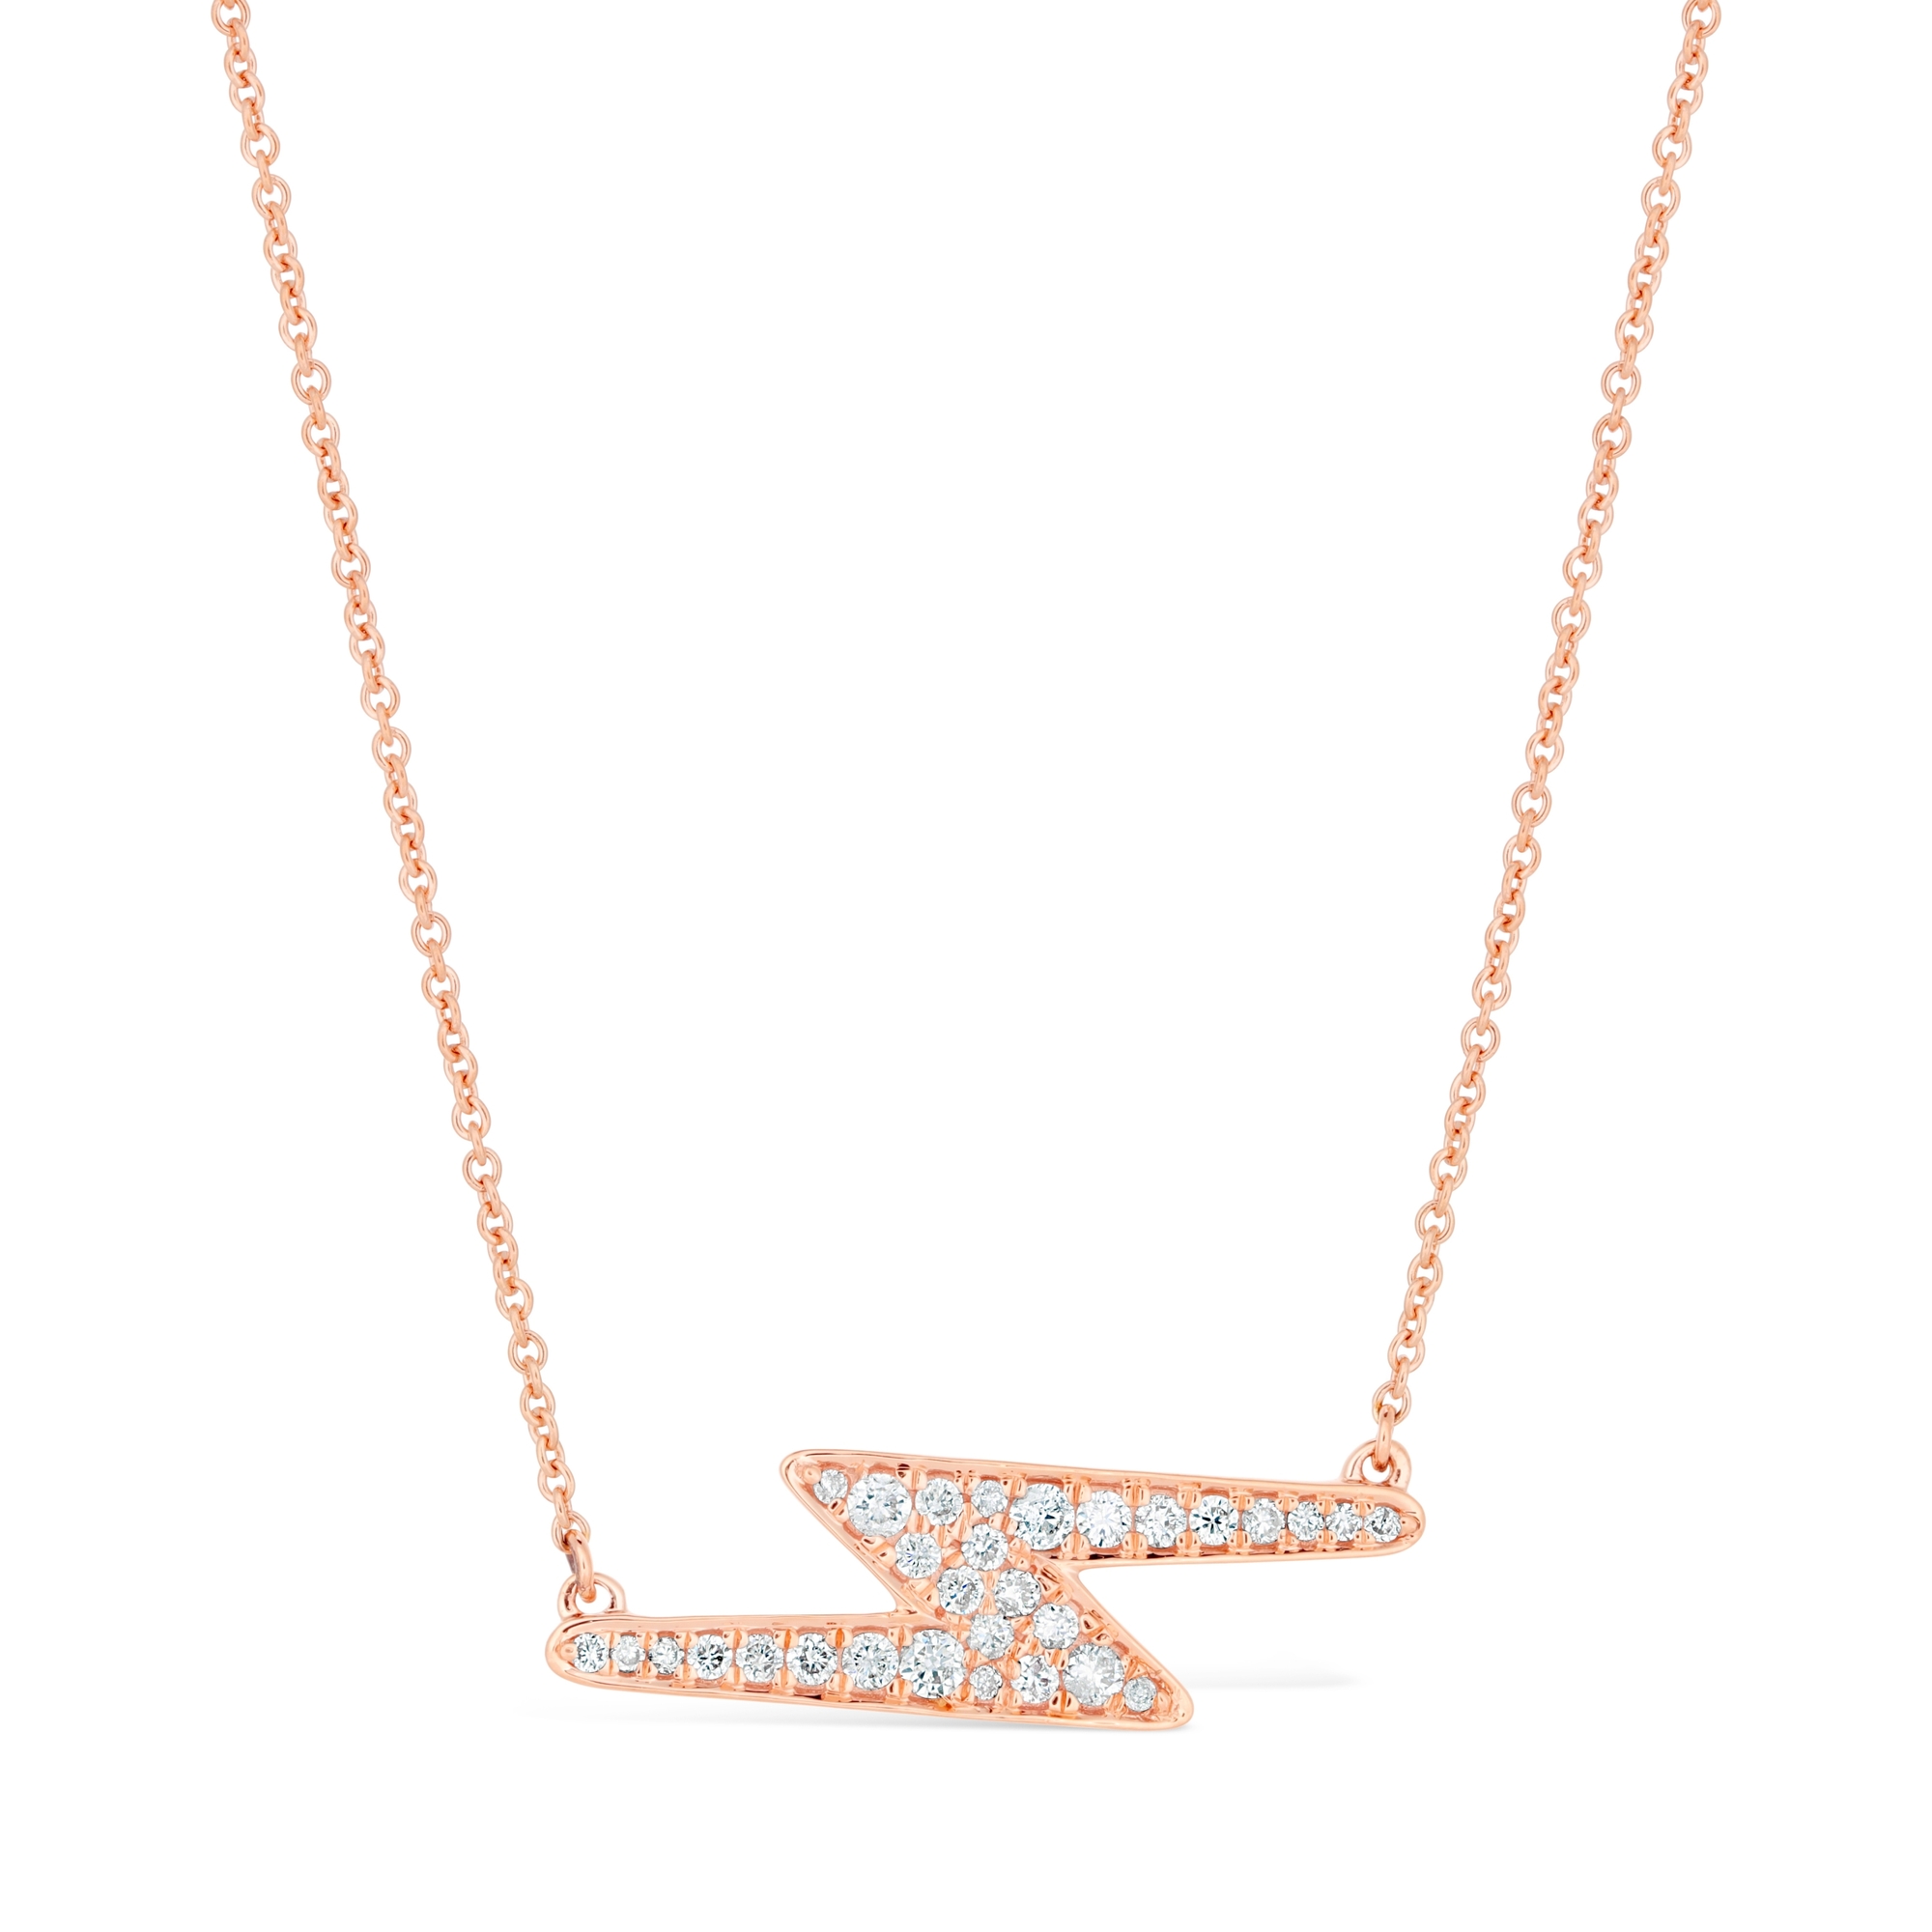 Lavari Jewelers Women's Lightning Bolt Diamond Necklace with Lobster Clasp, 14K Rose Gold, .25 Cttw, 18 Inch